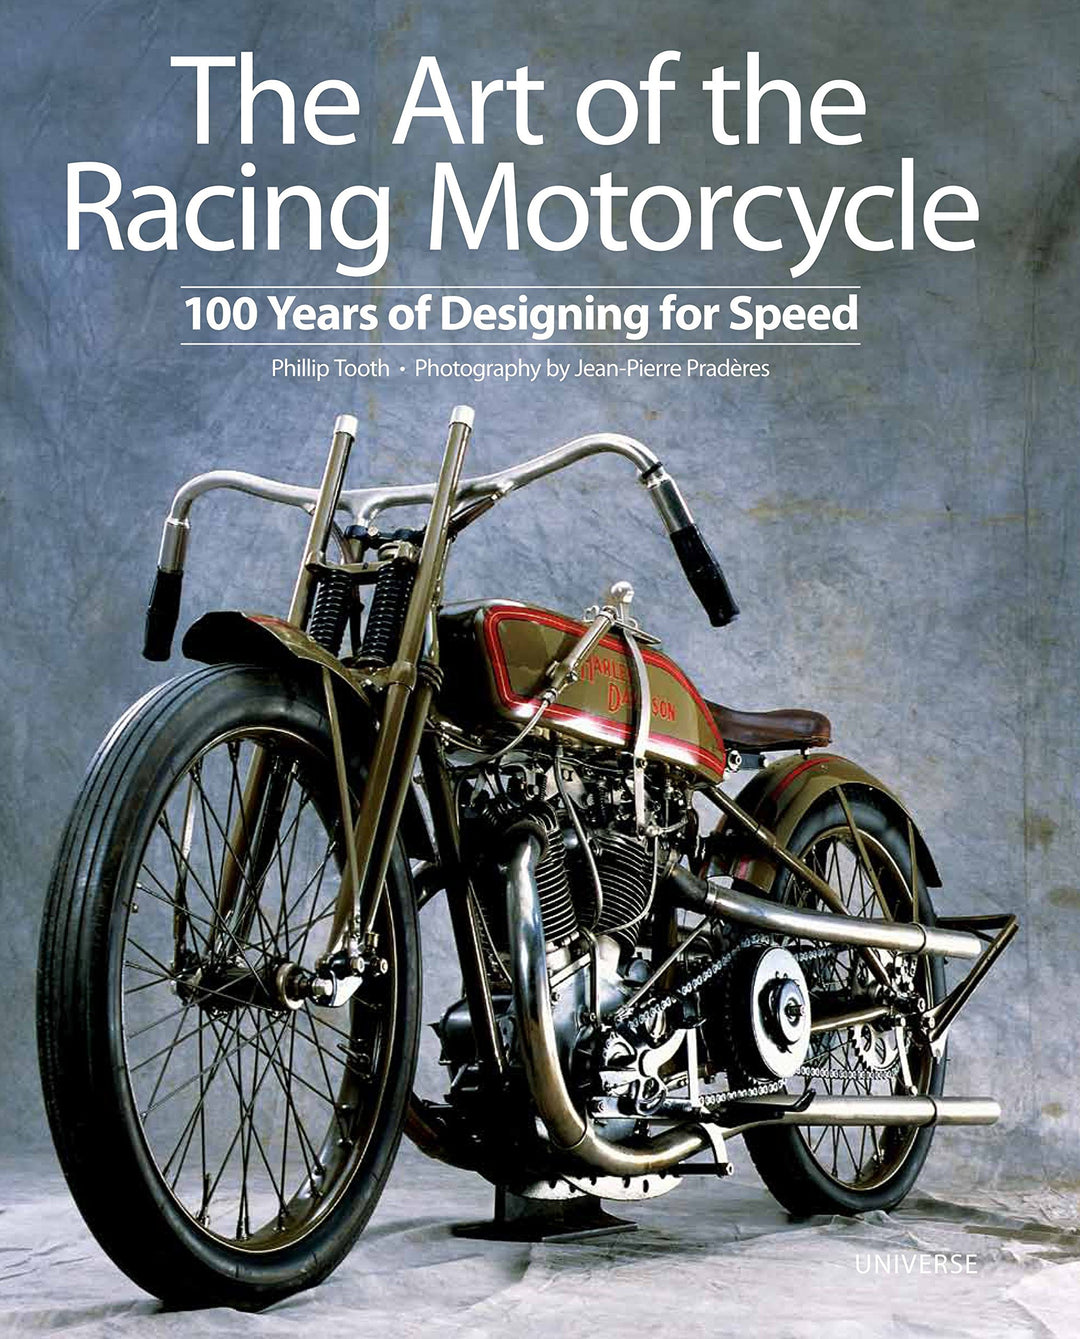 The Art of the Racing Motorcycle (English)